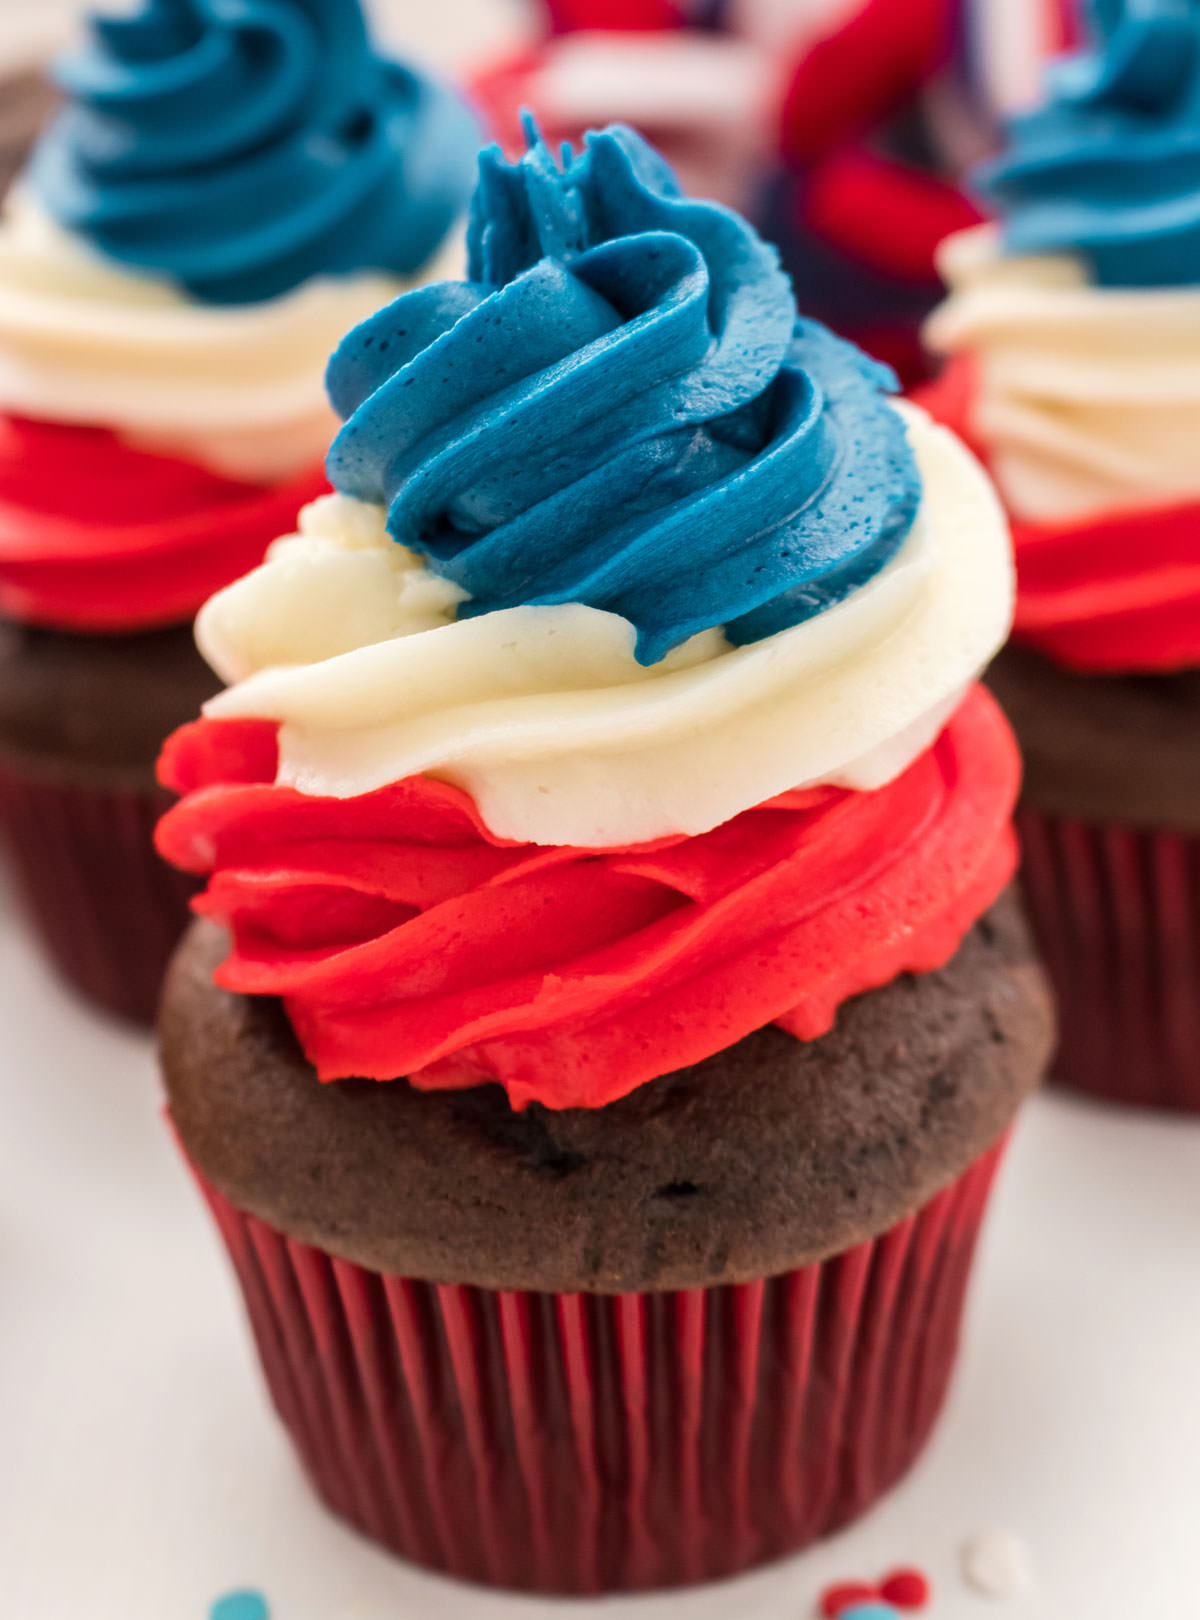 Closeup of a Patriotic Swirl Cupcake with Red White and Blue Buttercream Frosting sitting in front of other 4th of July cupcakes.